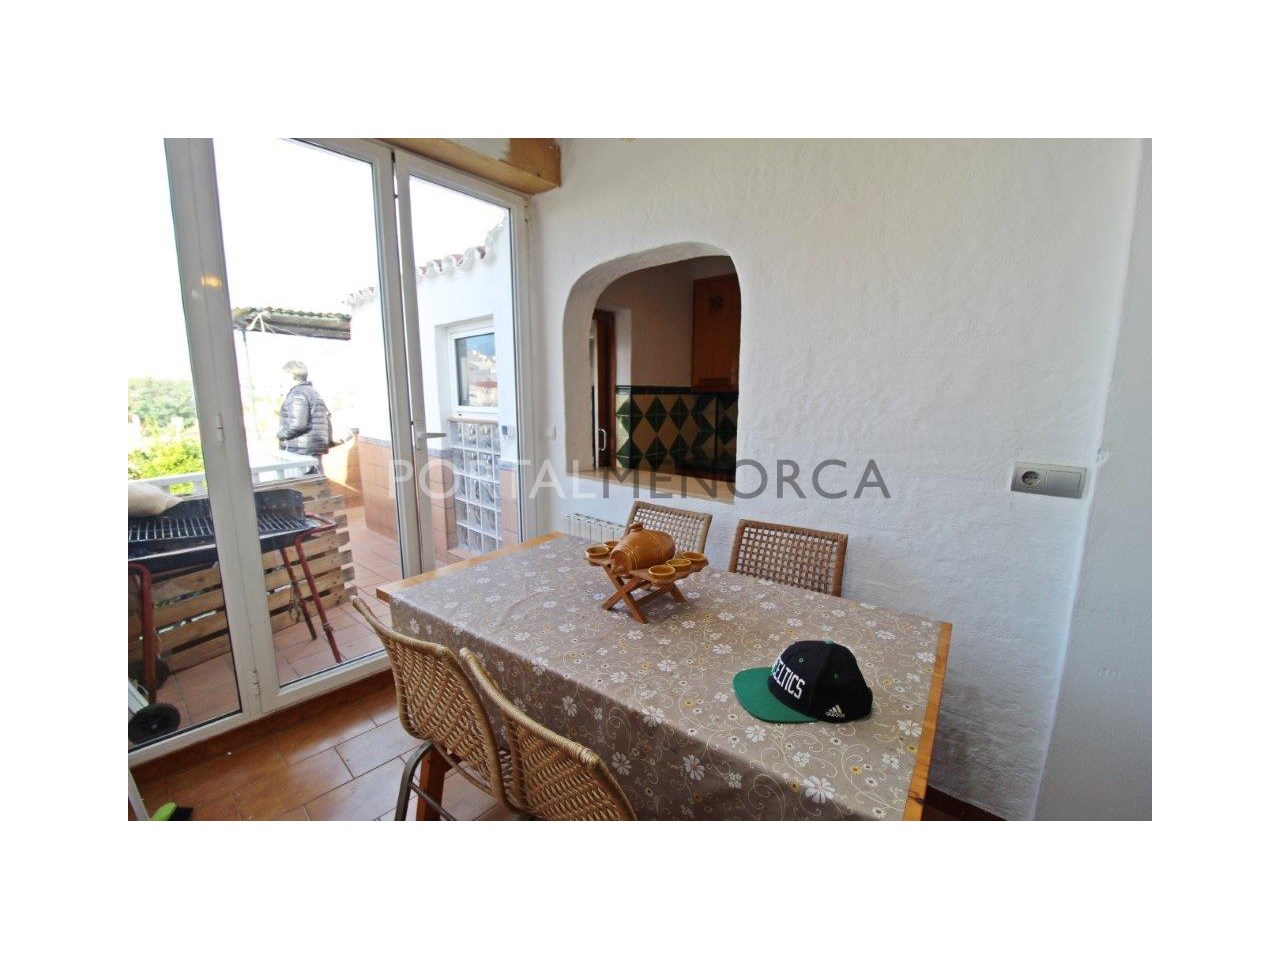 Apartment with patio for sale in Menorca